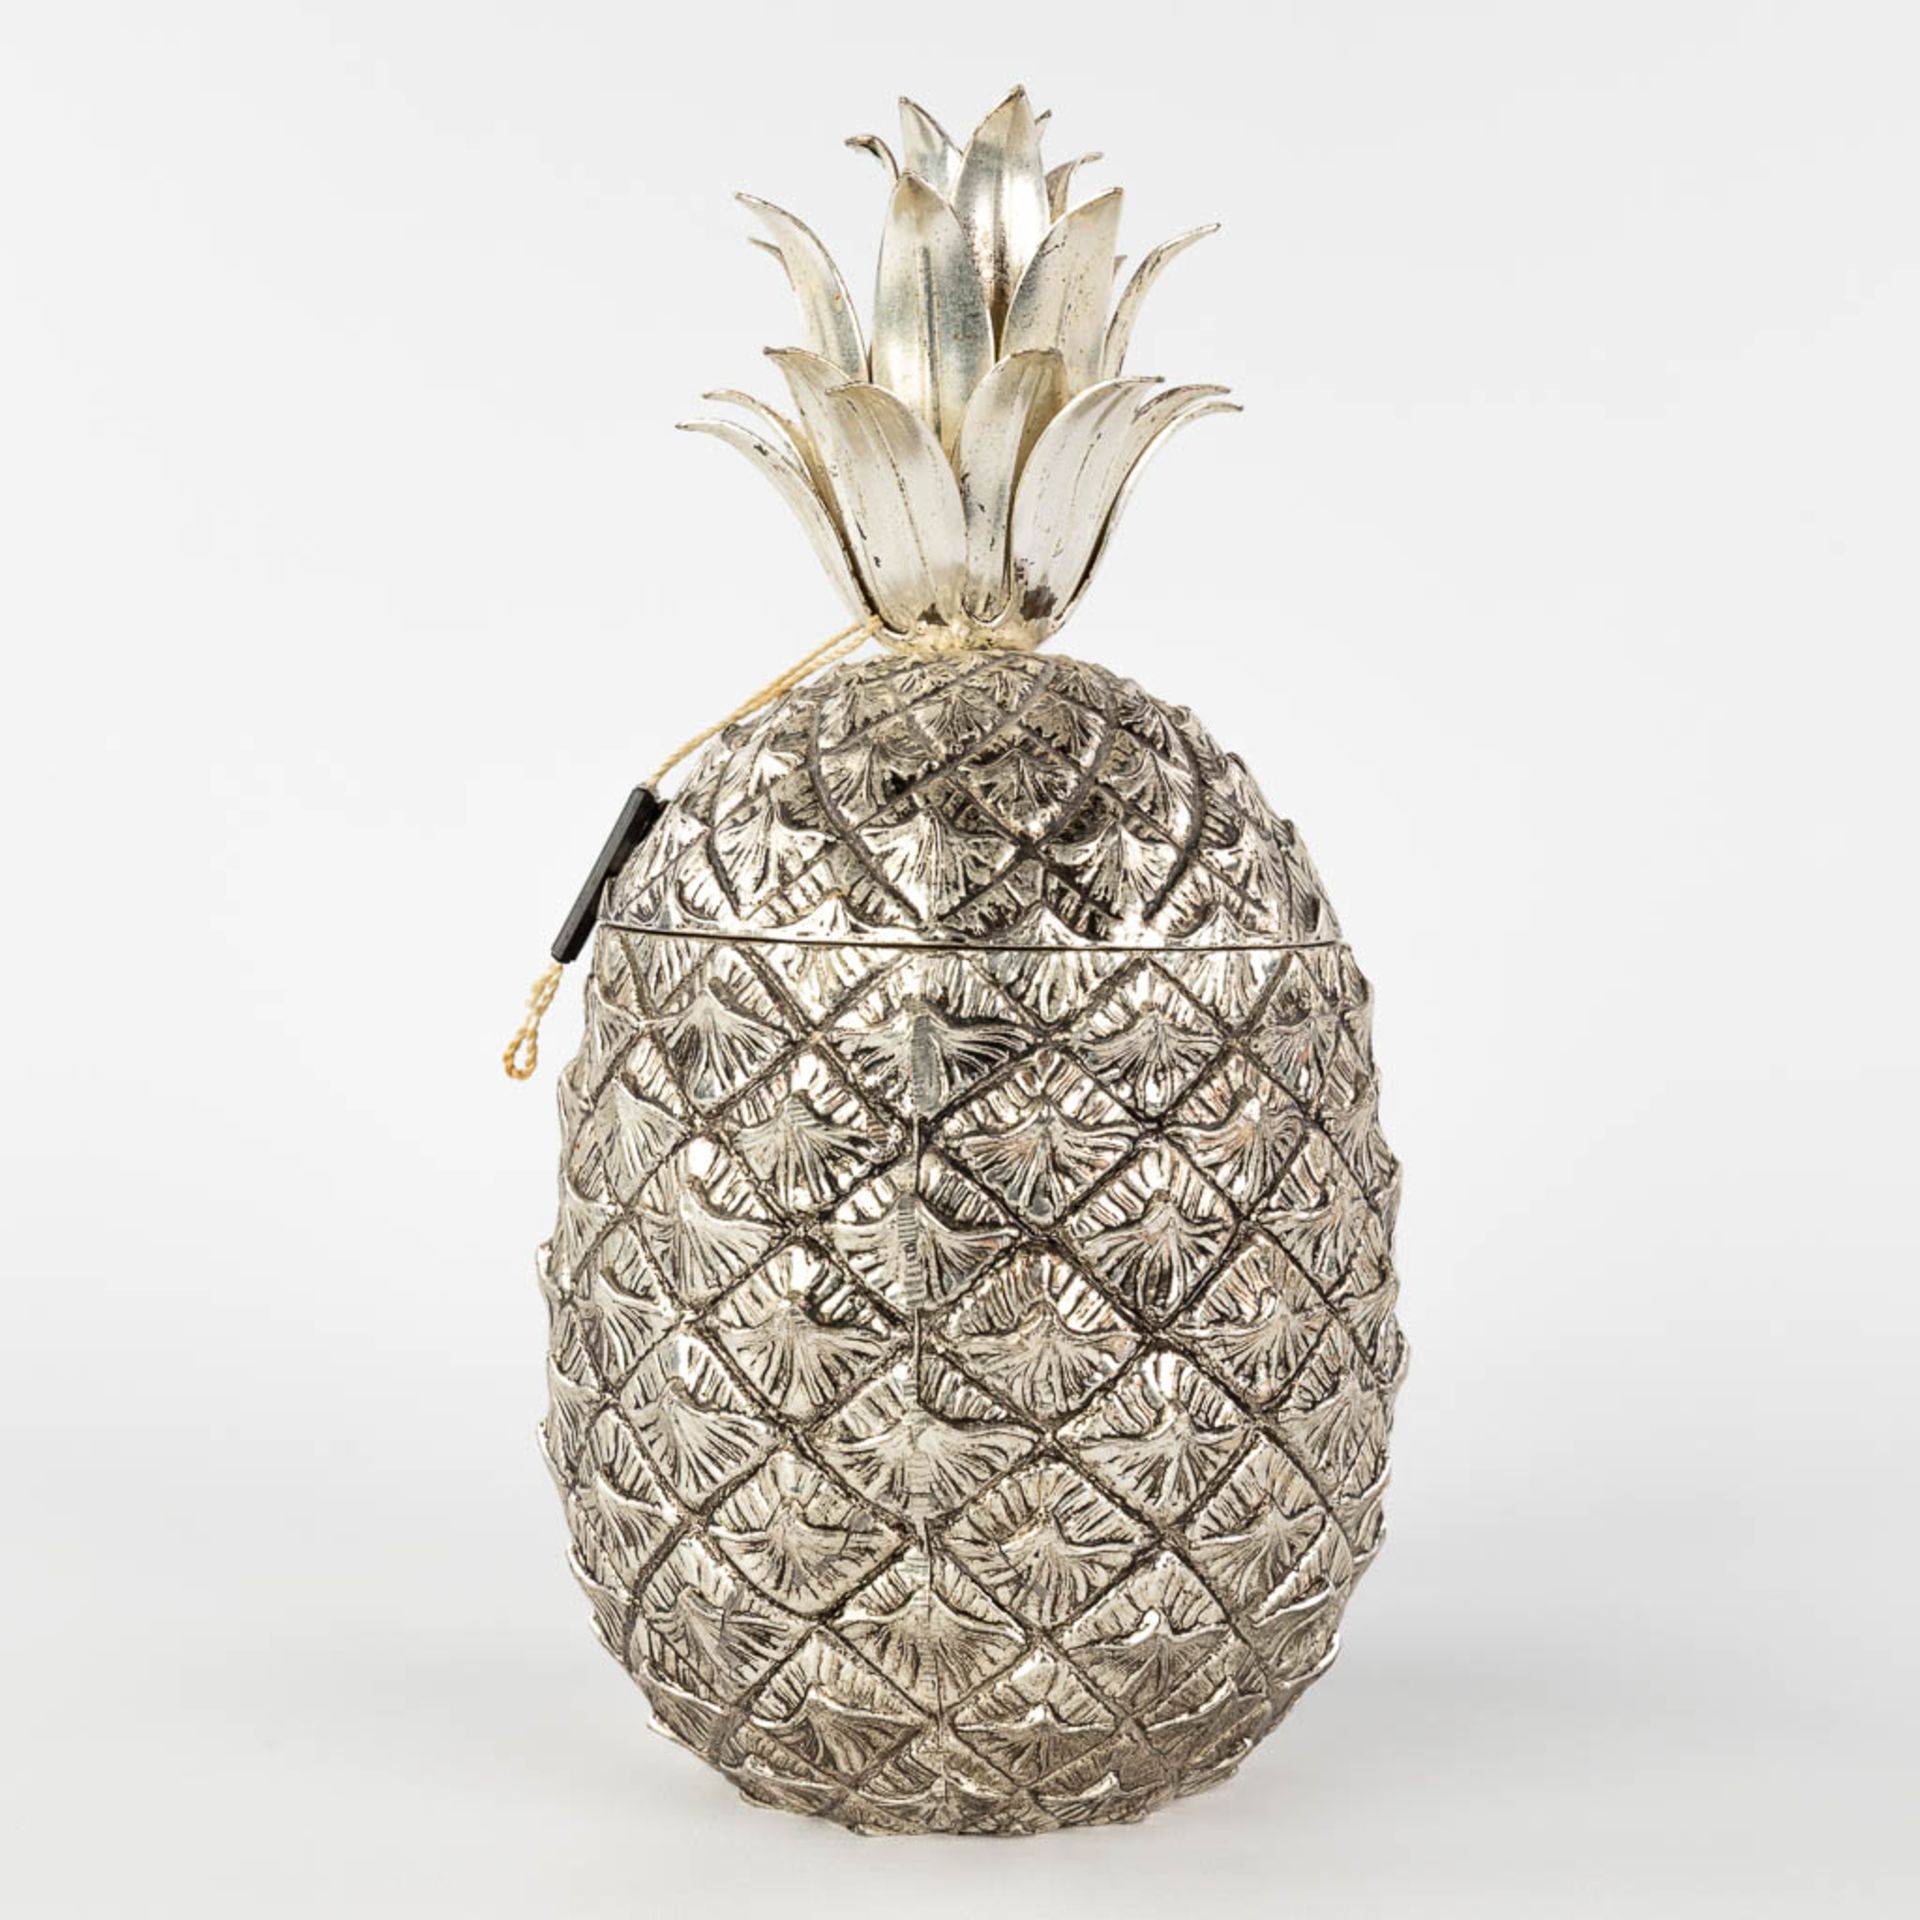 Mauro MANETTI (1946) 'Pineapple' an ice pail. (H:27 x D:13 cm) - Image 6 of 12